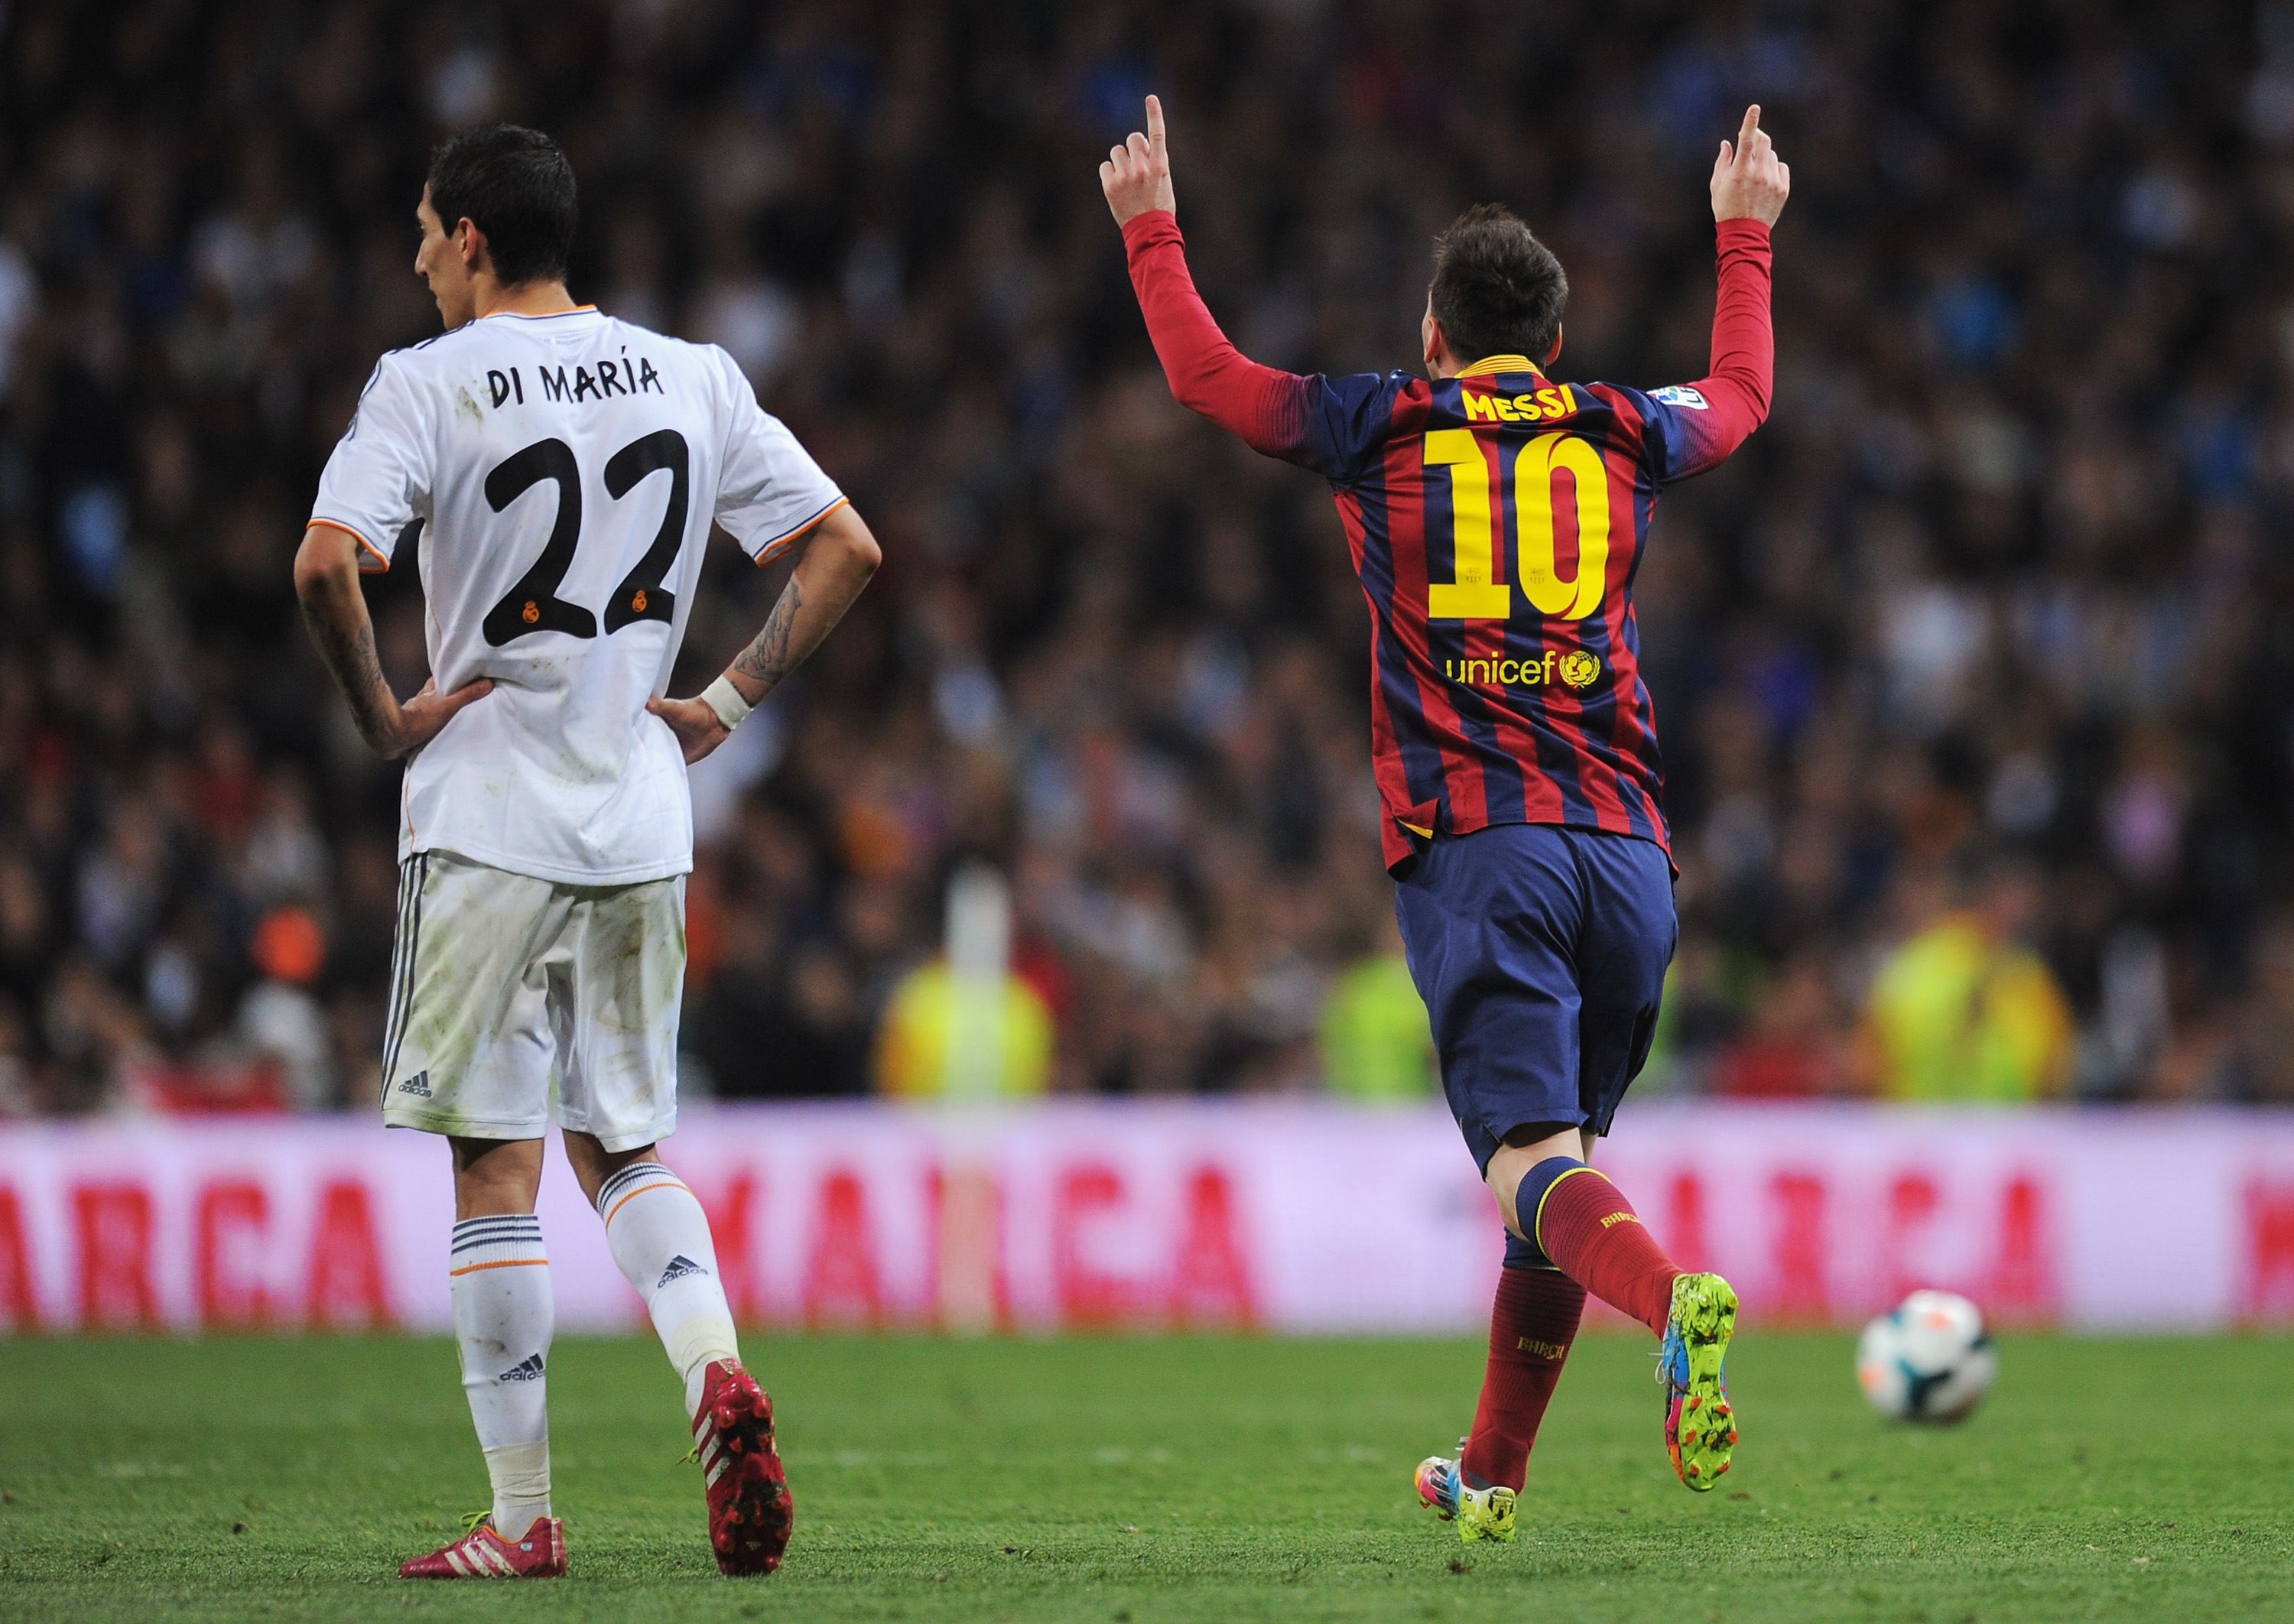 The El Clasico Game that was Shown on the Photo of Messi and